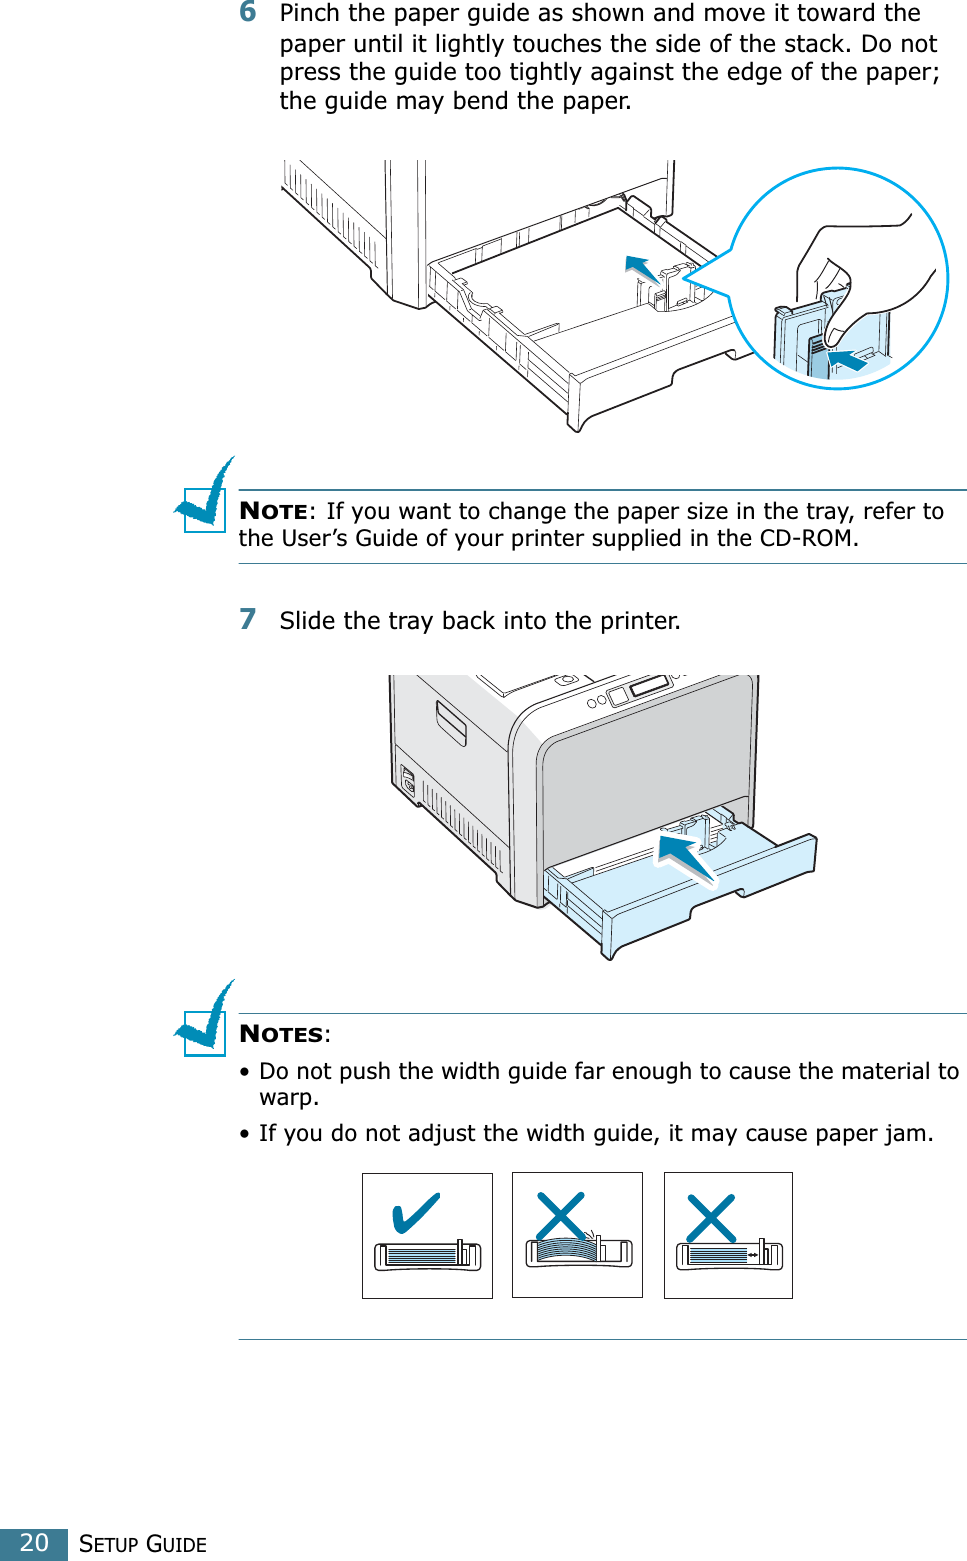 SETUP GUIDE206Pinch the paper guide as shown and move it toward the paper until it lightly touches the side of the stack. Do not press the guide too tightly against the edge of the paper; the guide may bend the paper. NOTE: If you want to change the paper size in the tray, refer to the User’s Guide of your printer supplied in the CD-ROM.7Slide the tray back into the printer.NOTES: • Do not push the width guide far enough to cause the material to warp. • If you do not adjust the width guide, it may cause paper jam.